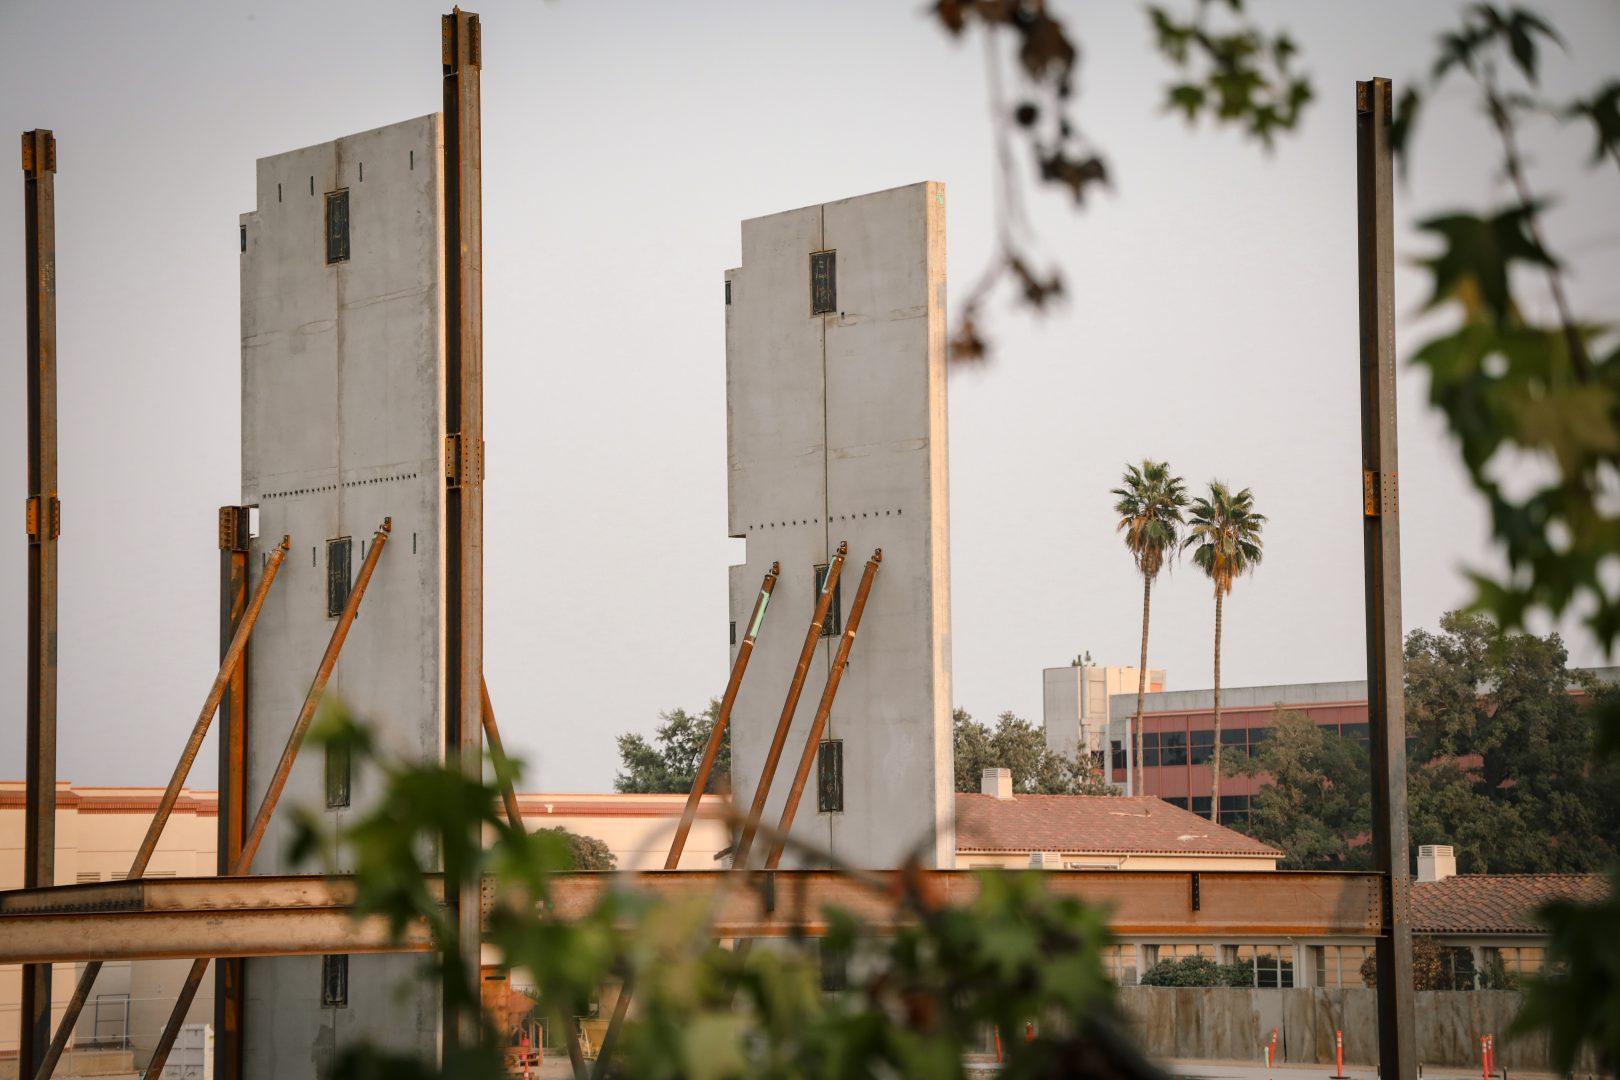 Fresno State’s Lynda and Stewart Resnick Student Union has paused construction until the State Fire Marshal gives final approval of the building plans. (Vendila Yang/The Collegian)